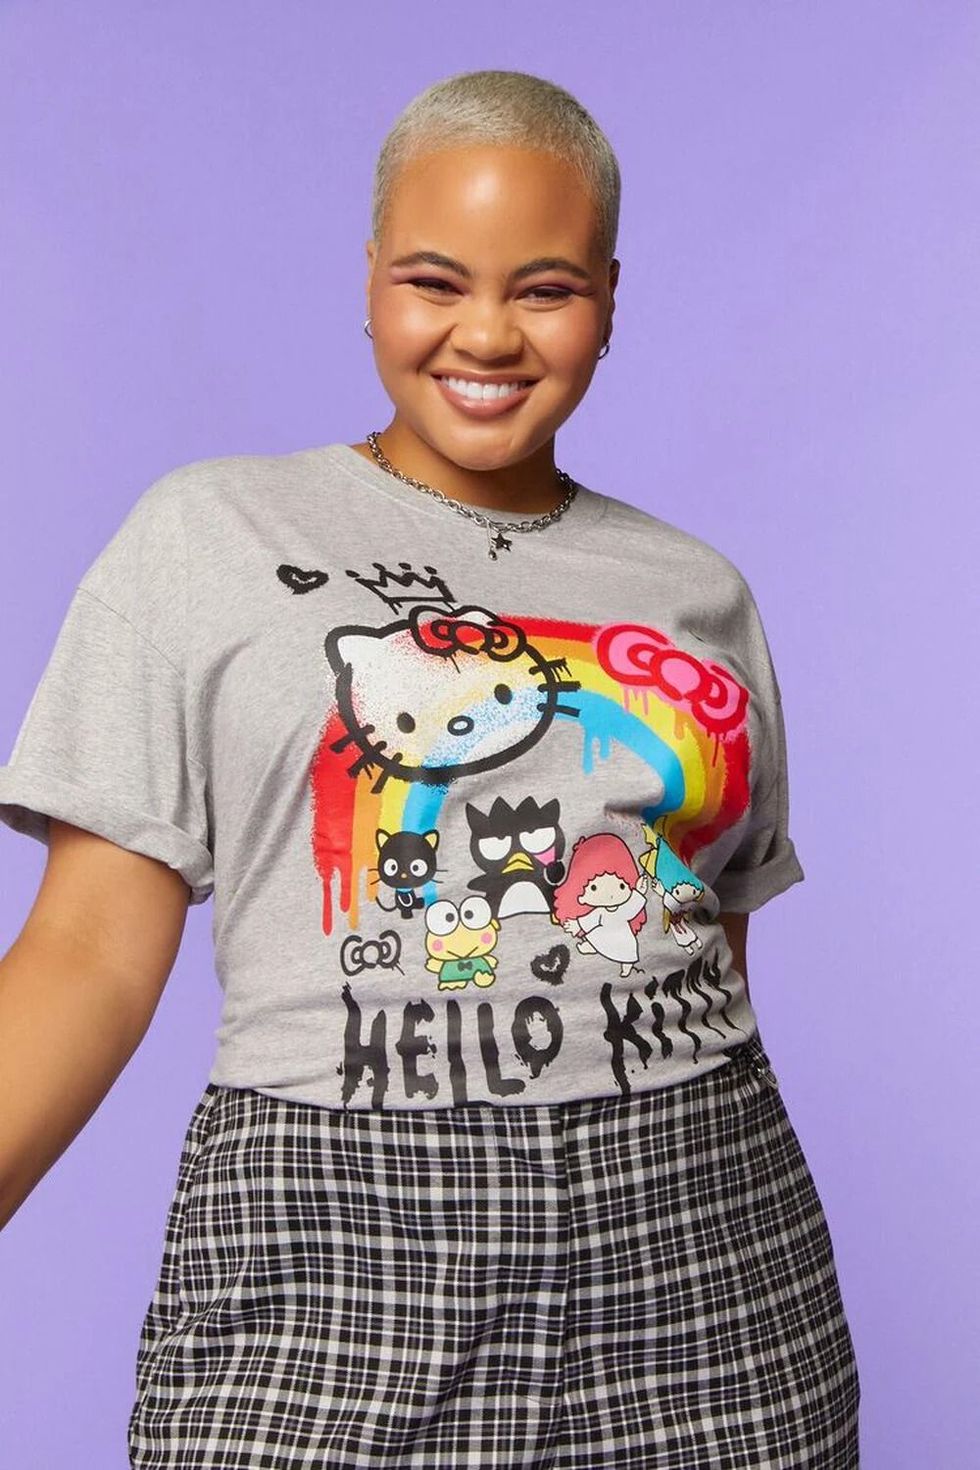 My forever 21 x hello kitty and friends collection 🥰 plus my HK